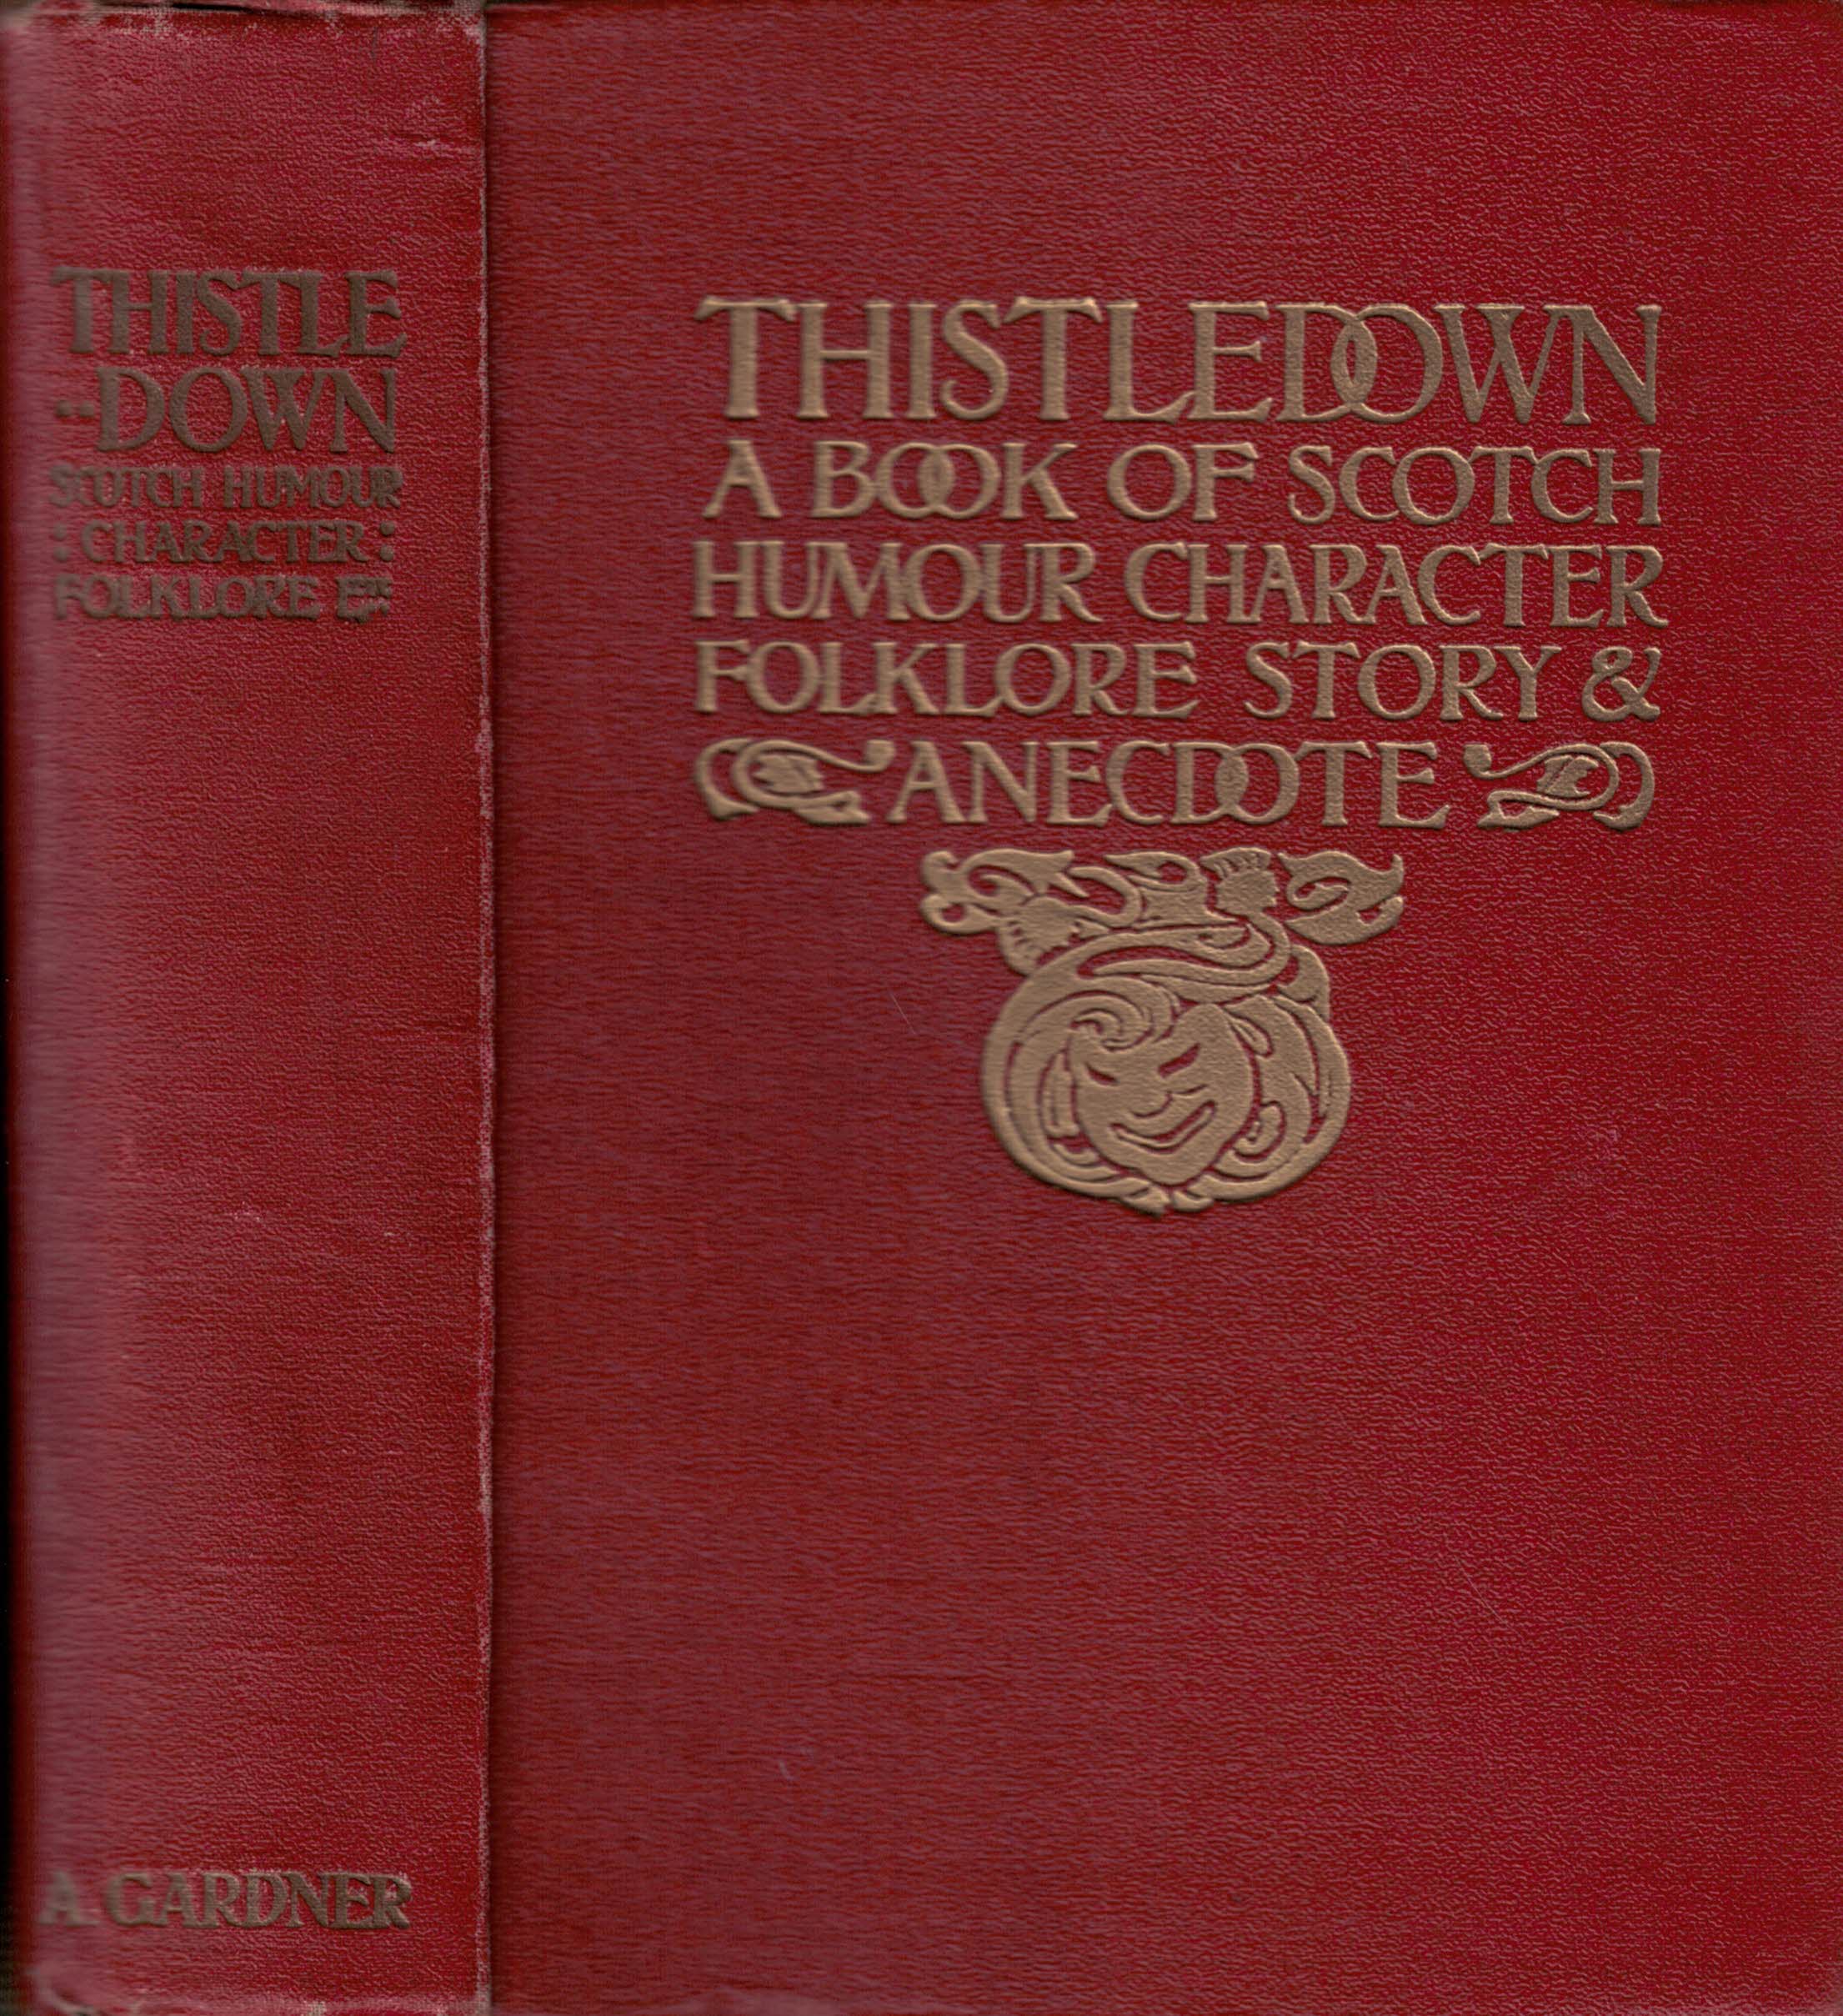 Thistledown. A Book of Scotch Humour Character, Folk-lore Story & Anecdote.